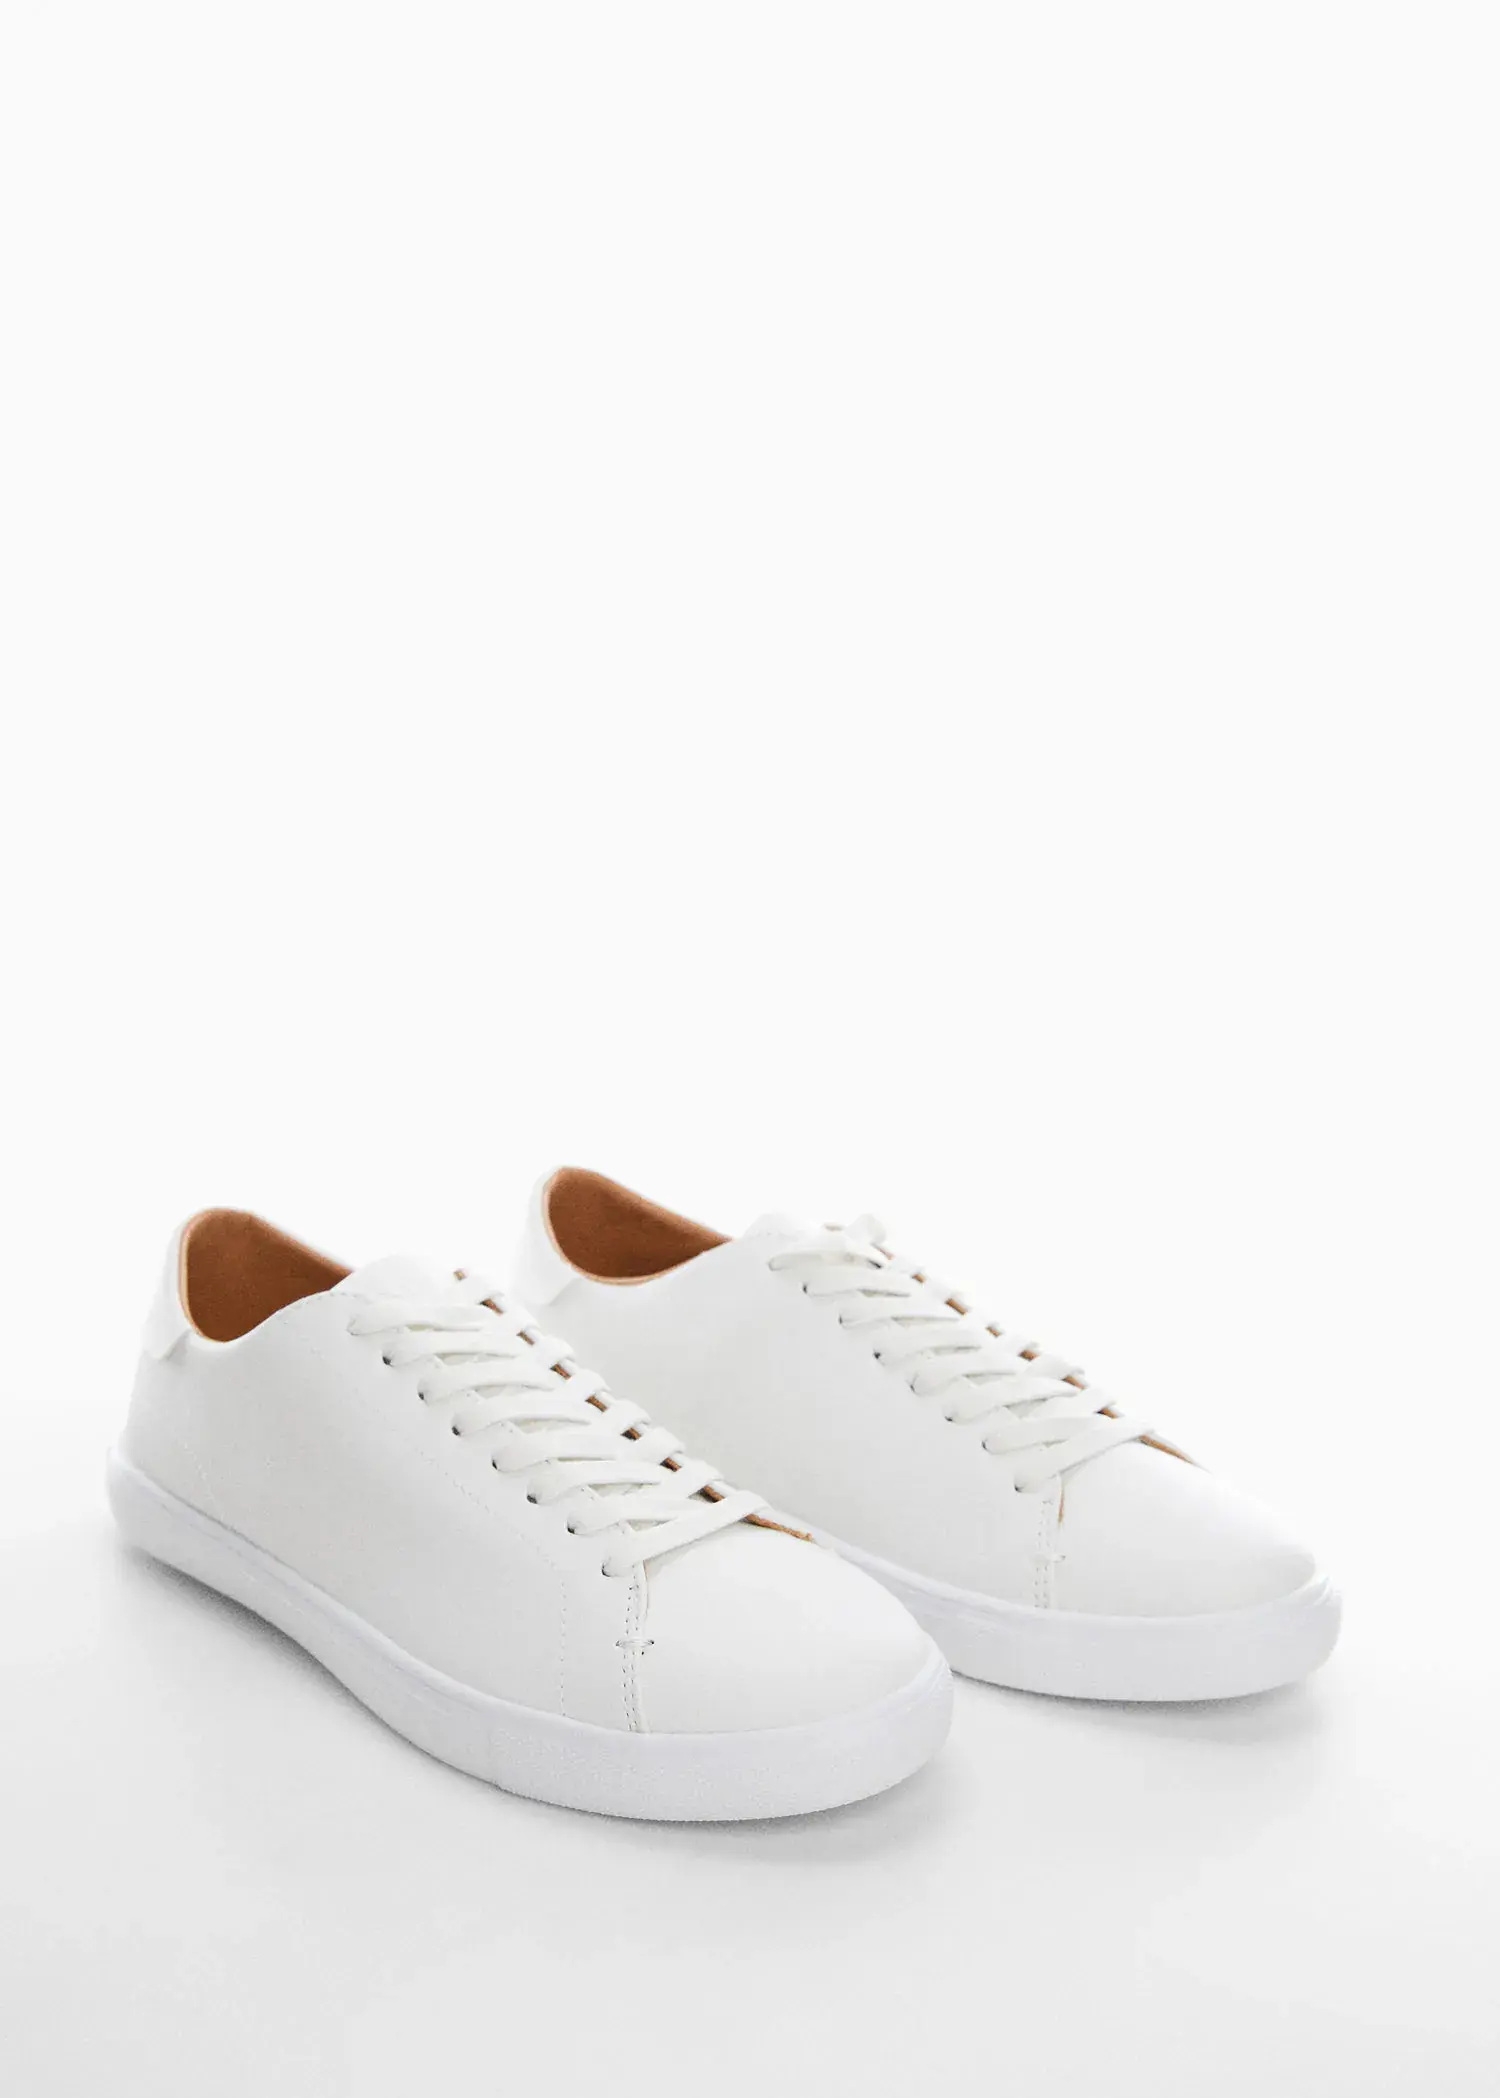 Mango Monocoloured leather sneakers. a pair of white sneakers on a white surface. 